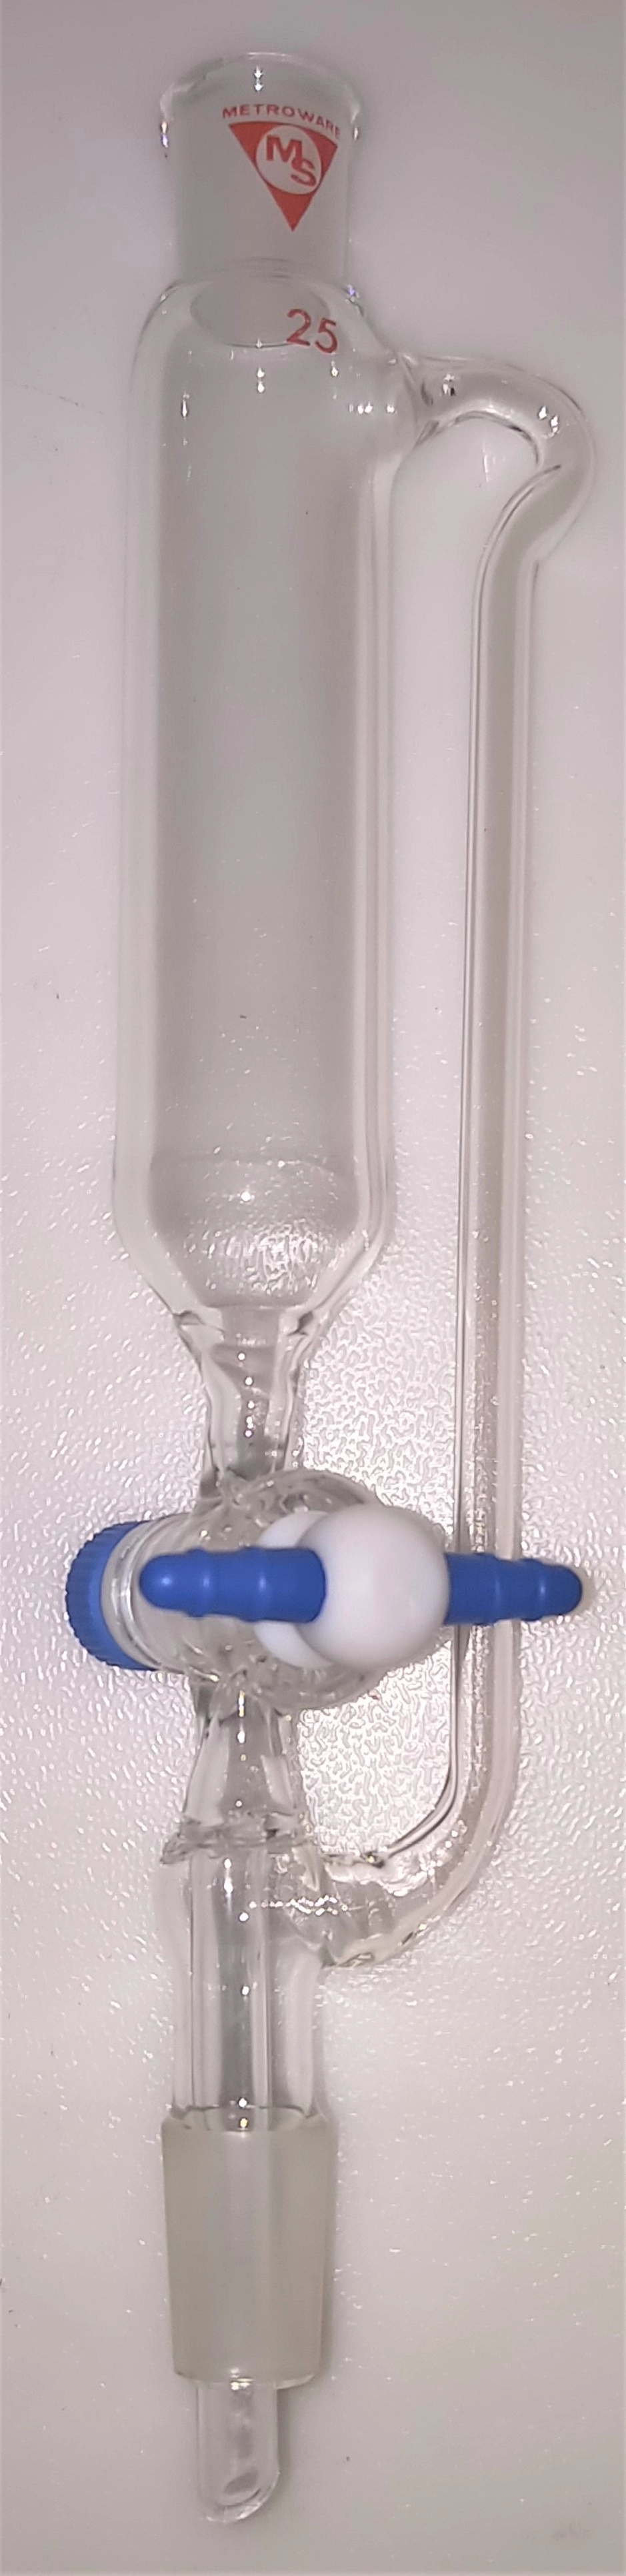 MetroWare Addition Funnel with Pressure-Equalizing Arm - 25mL